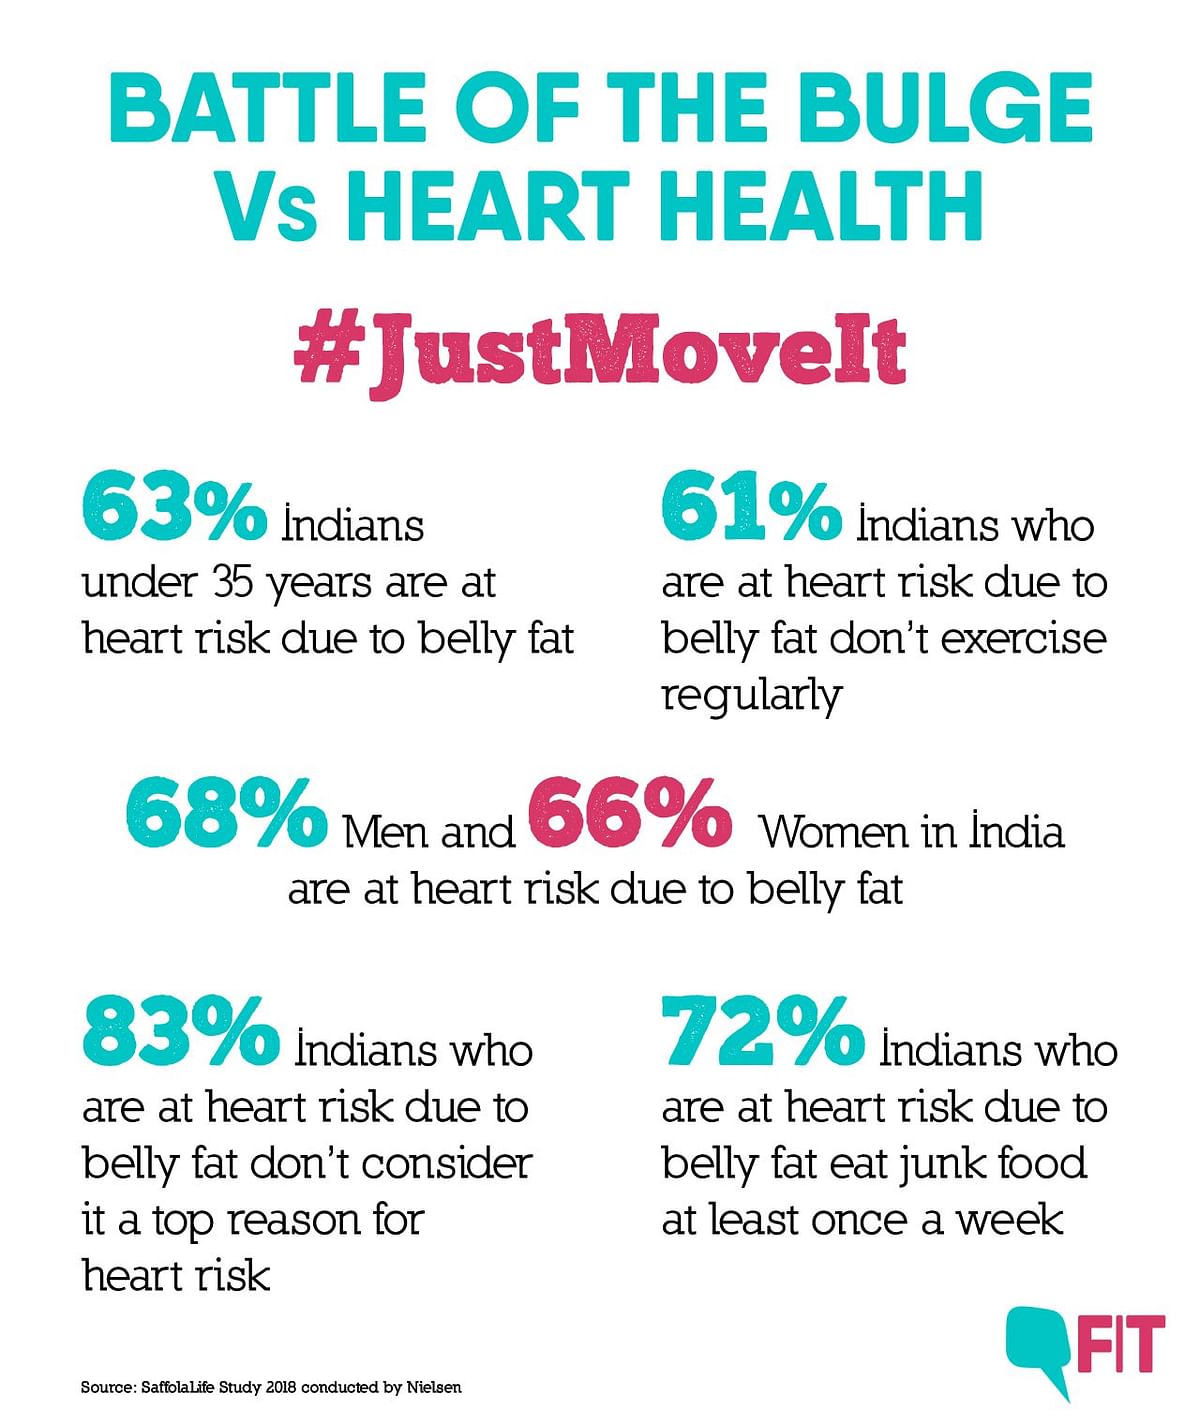 About 84 percent Indians who have belly fat, don’t even consider it among the top three reasons of heart problems. 